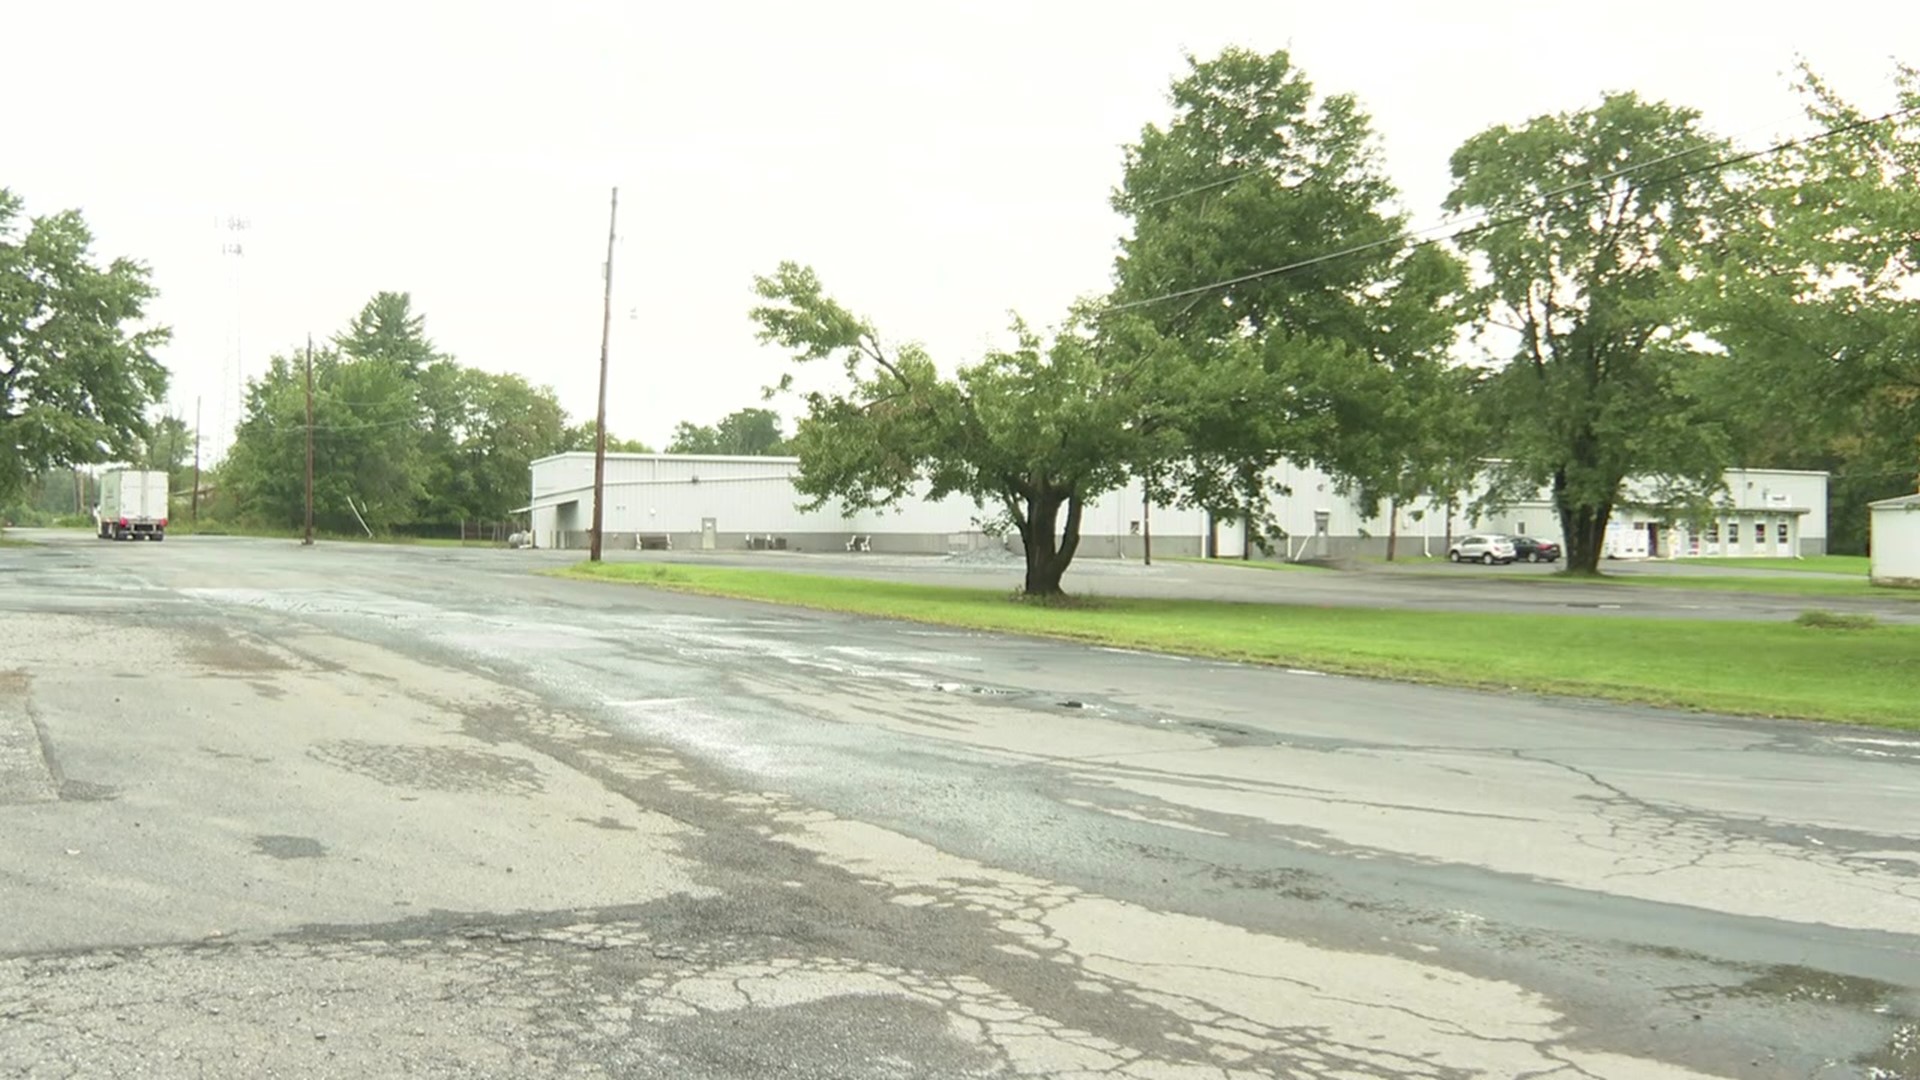 One borough in Schuylkill County is receiving close to $1 million to upgrade an industrial park. It's expected to bring in hundreds of jobs.